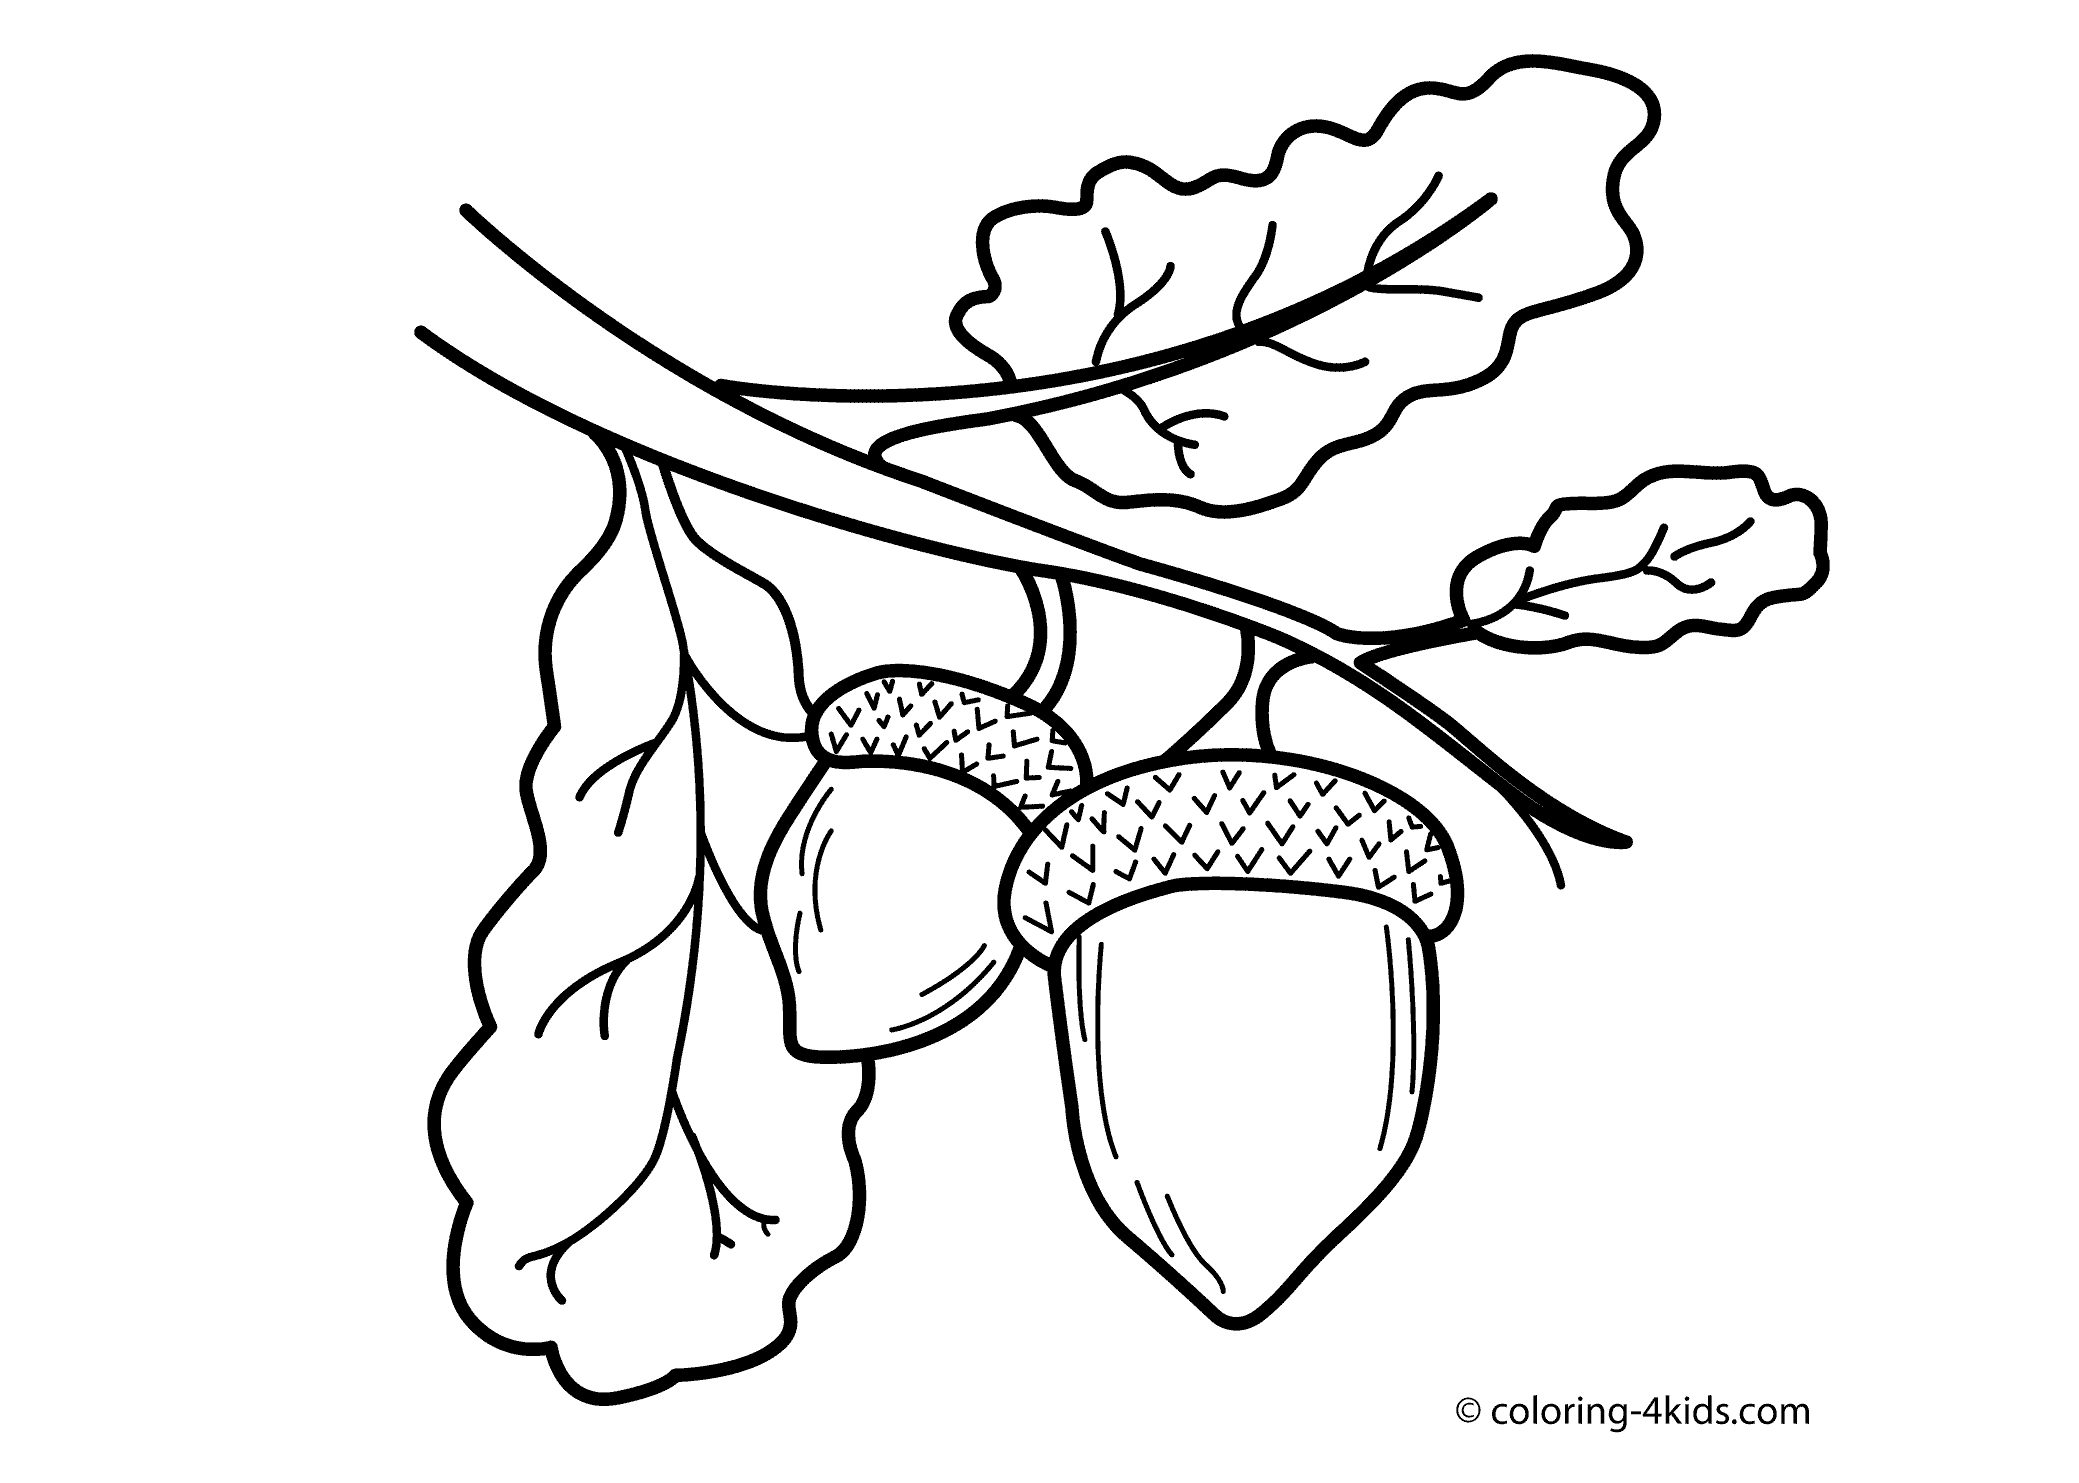 Wallpapers Coloring Page Nature Acorn .2 2079x1483 | #45875 ...